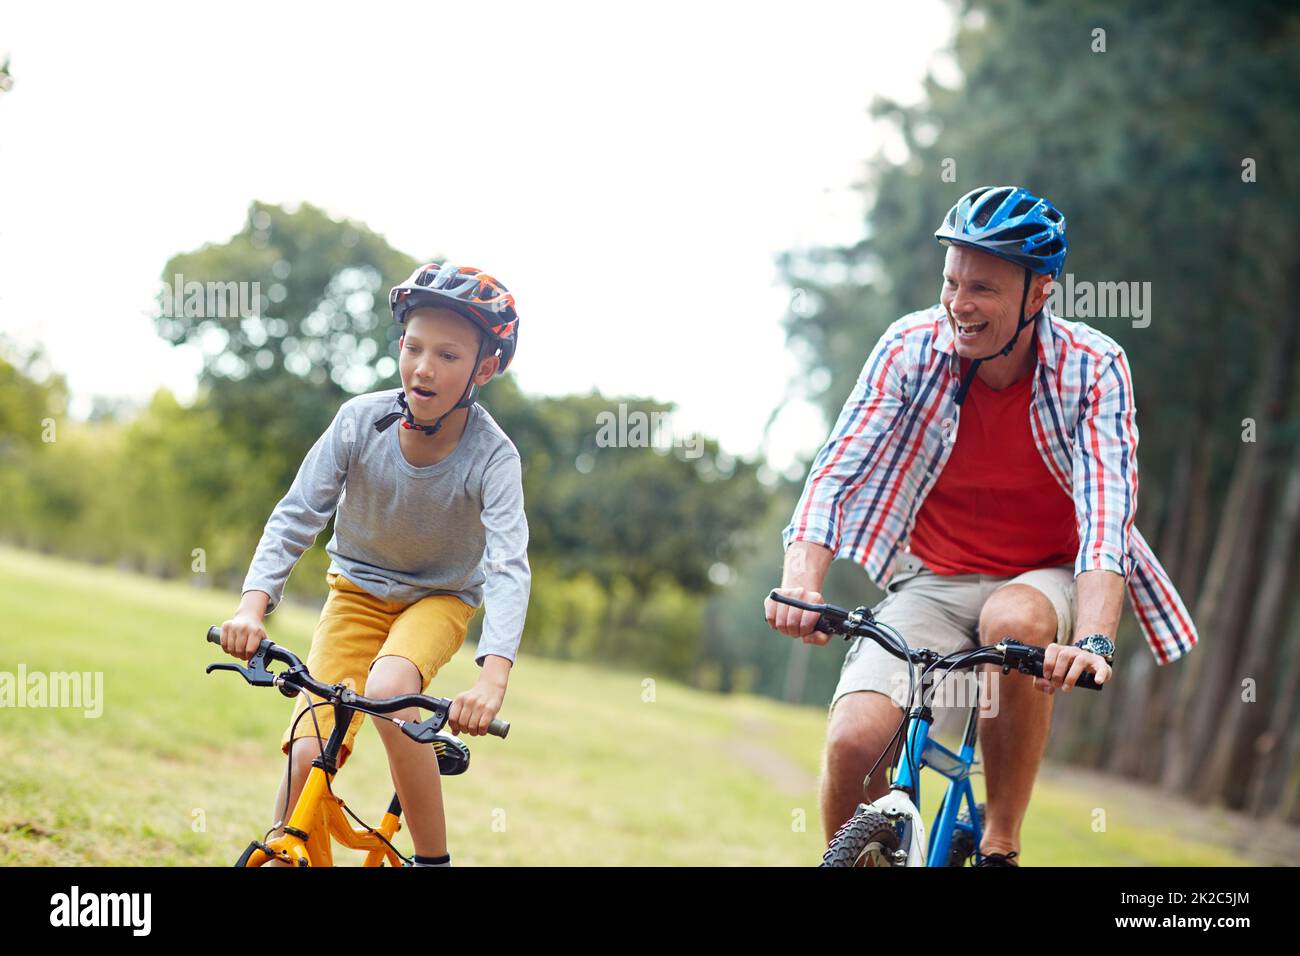 They love racing each other. Shot of a father and son riding bicycles in a park. Stock Photo